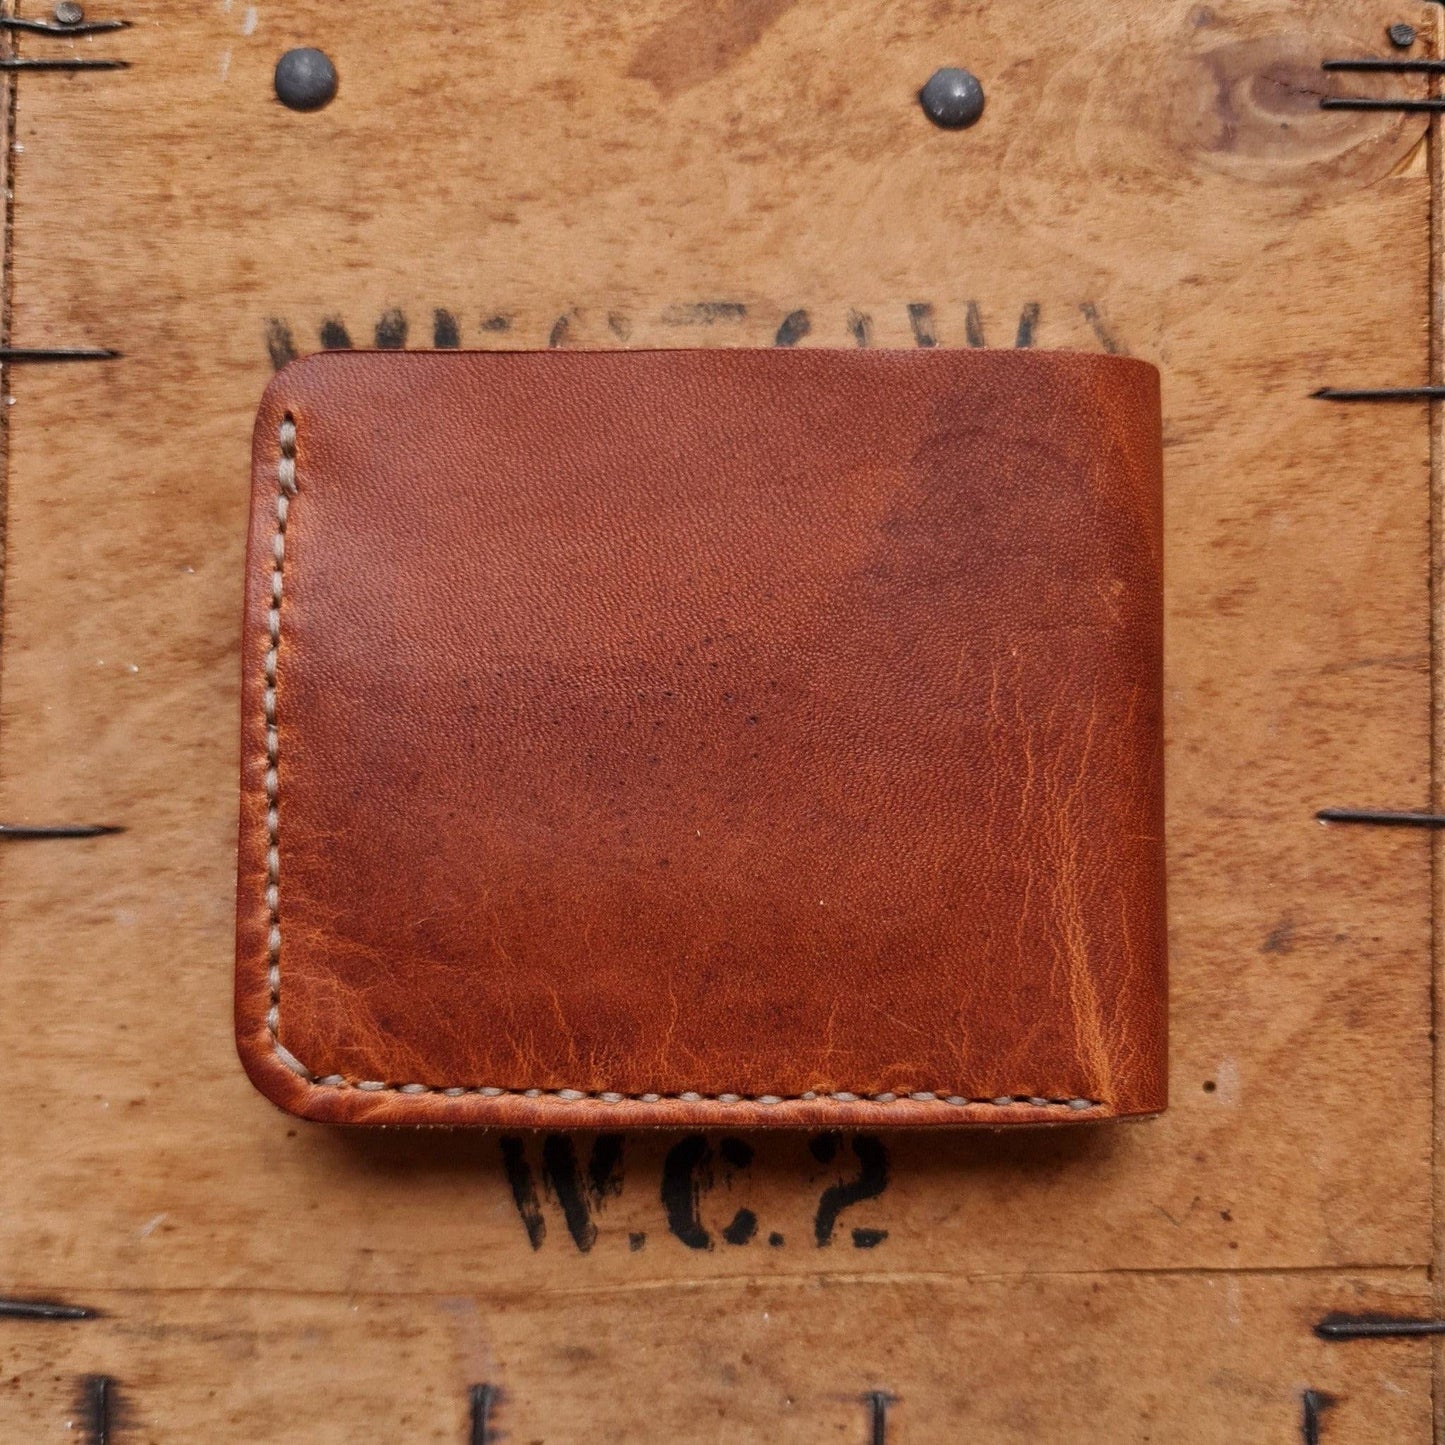 No. 2 Frontiersman Leather Bifold Wallet, Horween English Tan Dublin Leather, Back